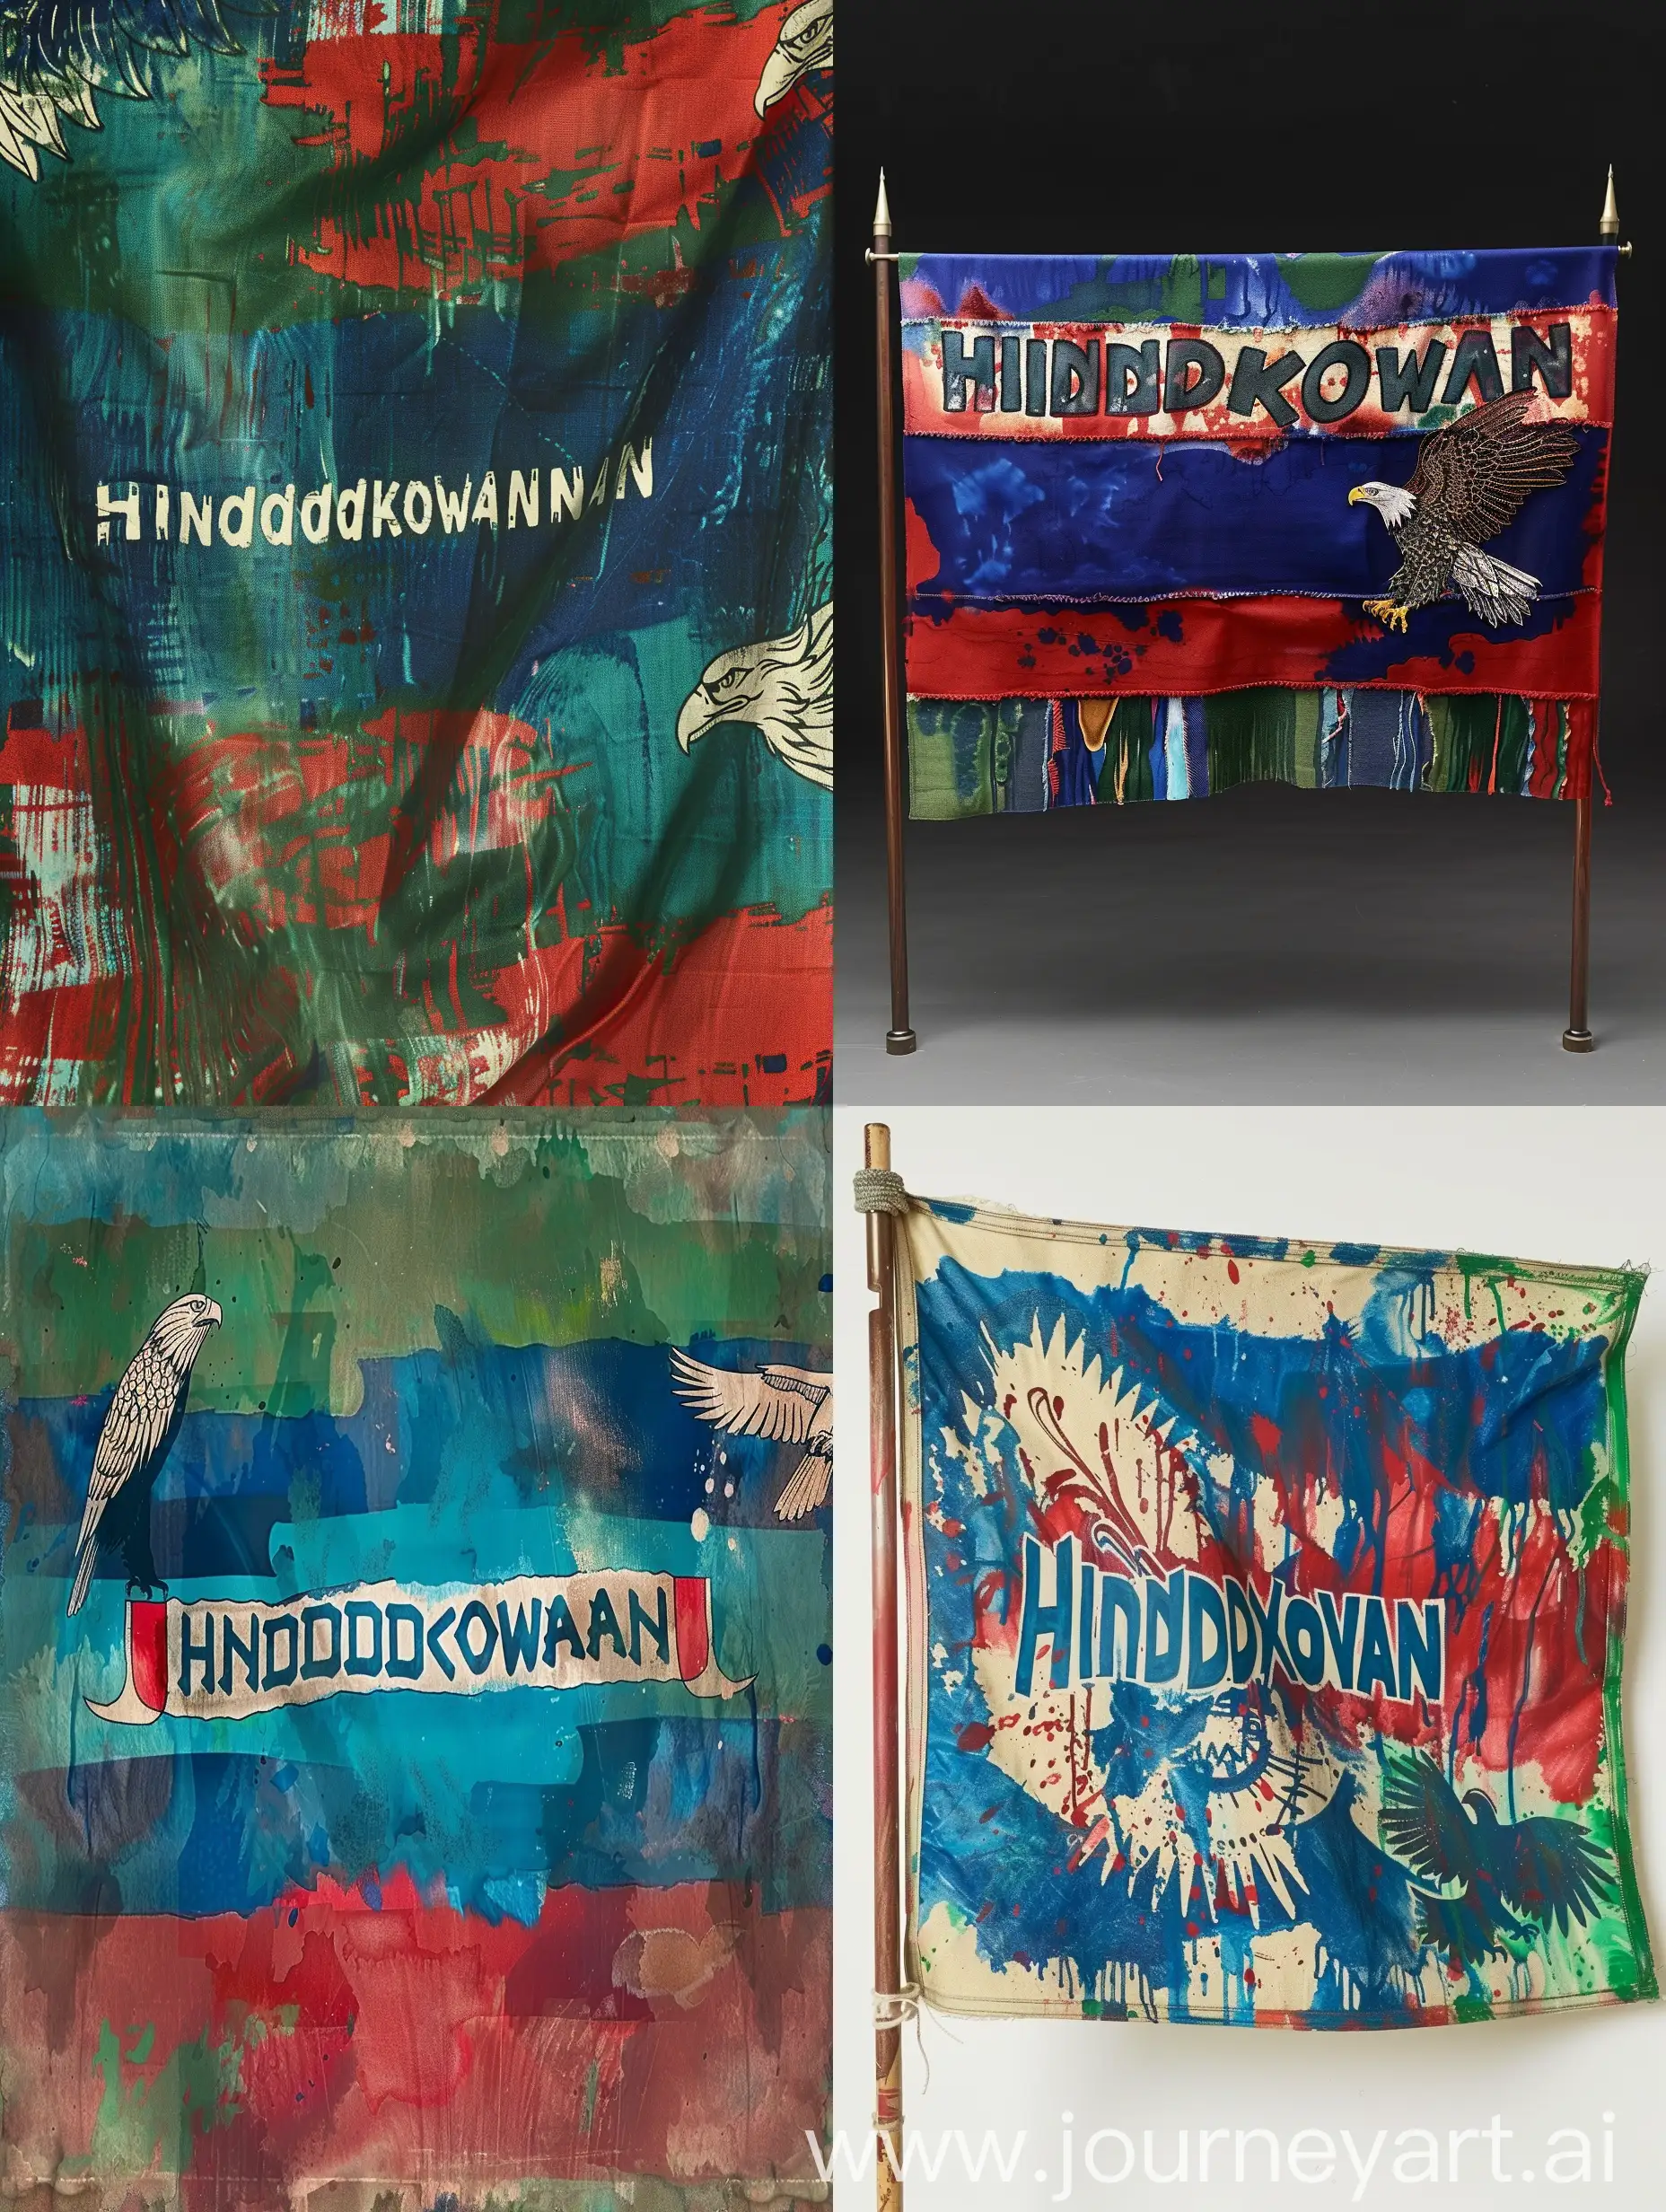 Flag with color blue,red,green ink in the middle with the text "hindkowan" also eagle on both right,left side